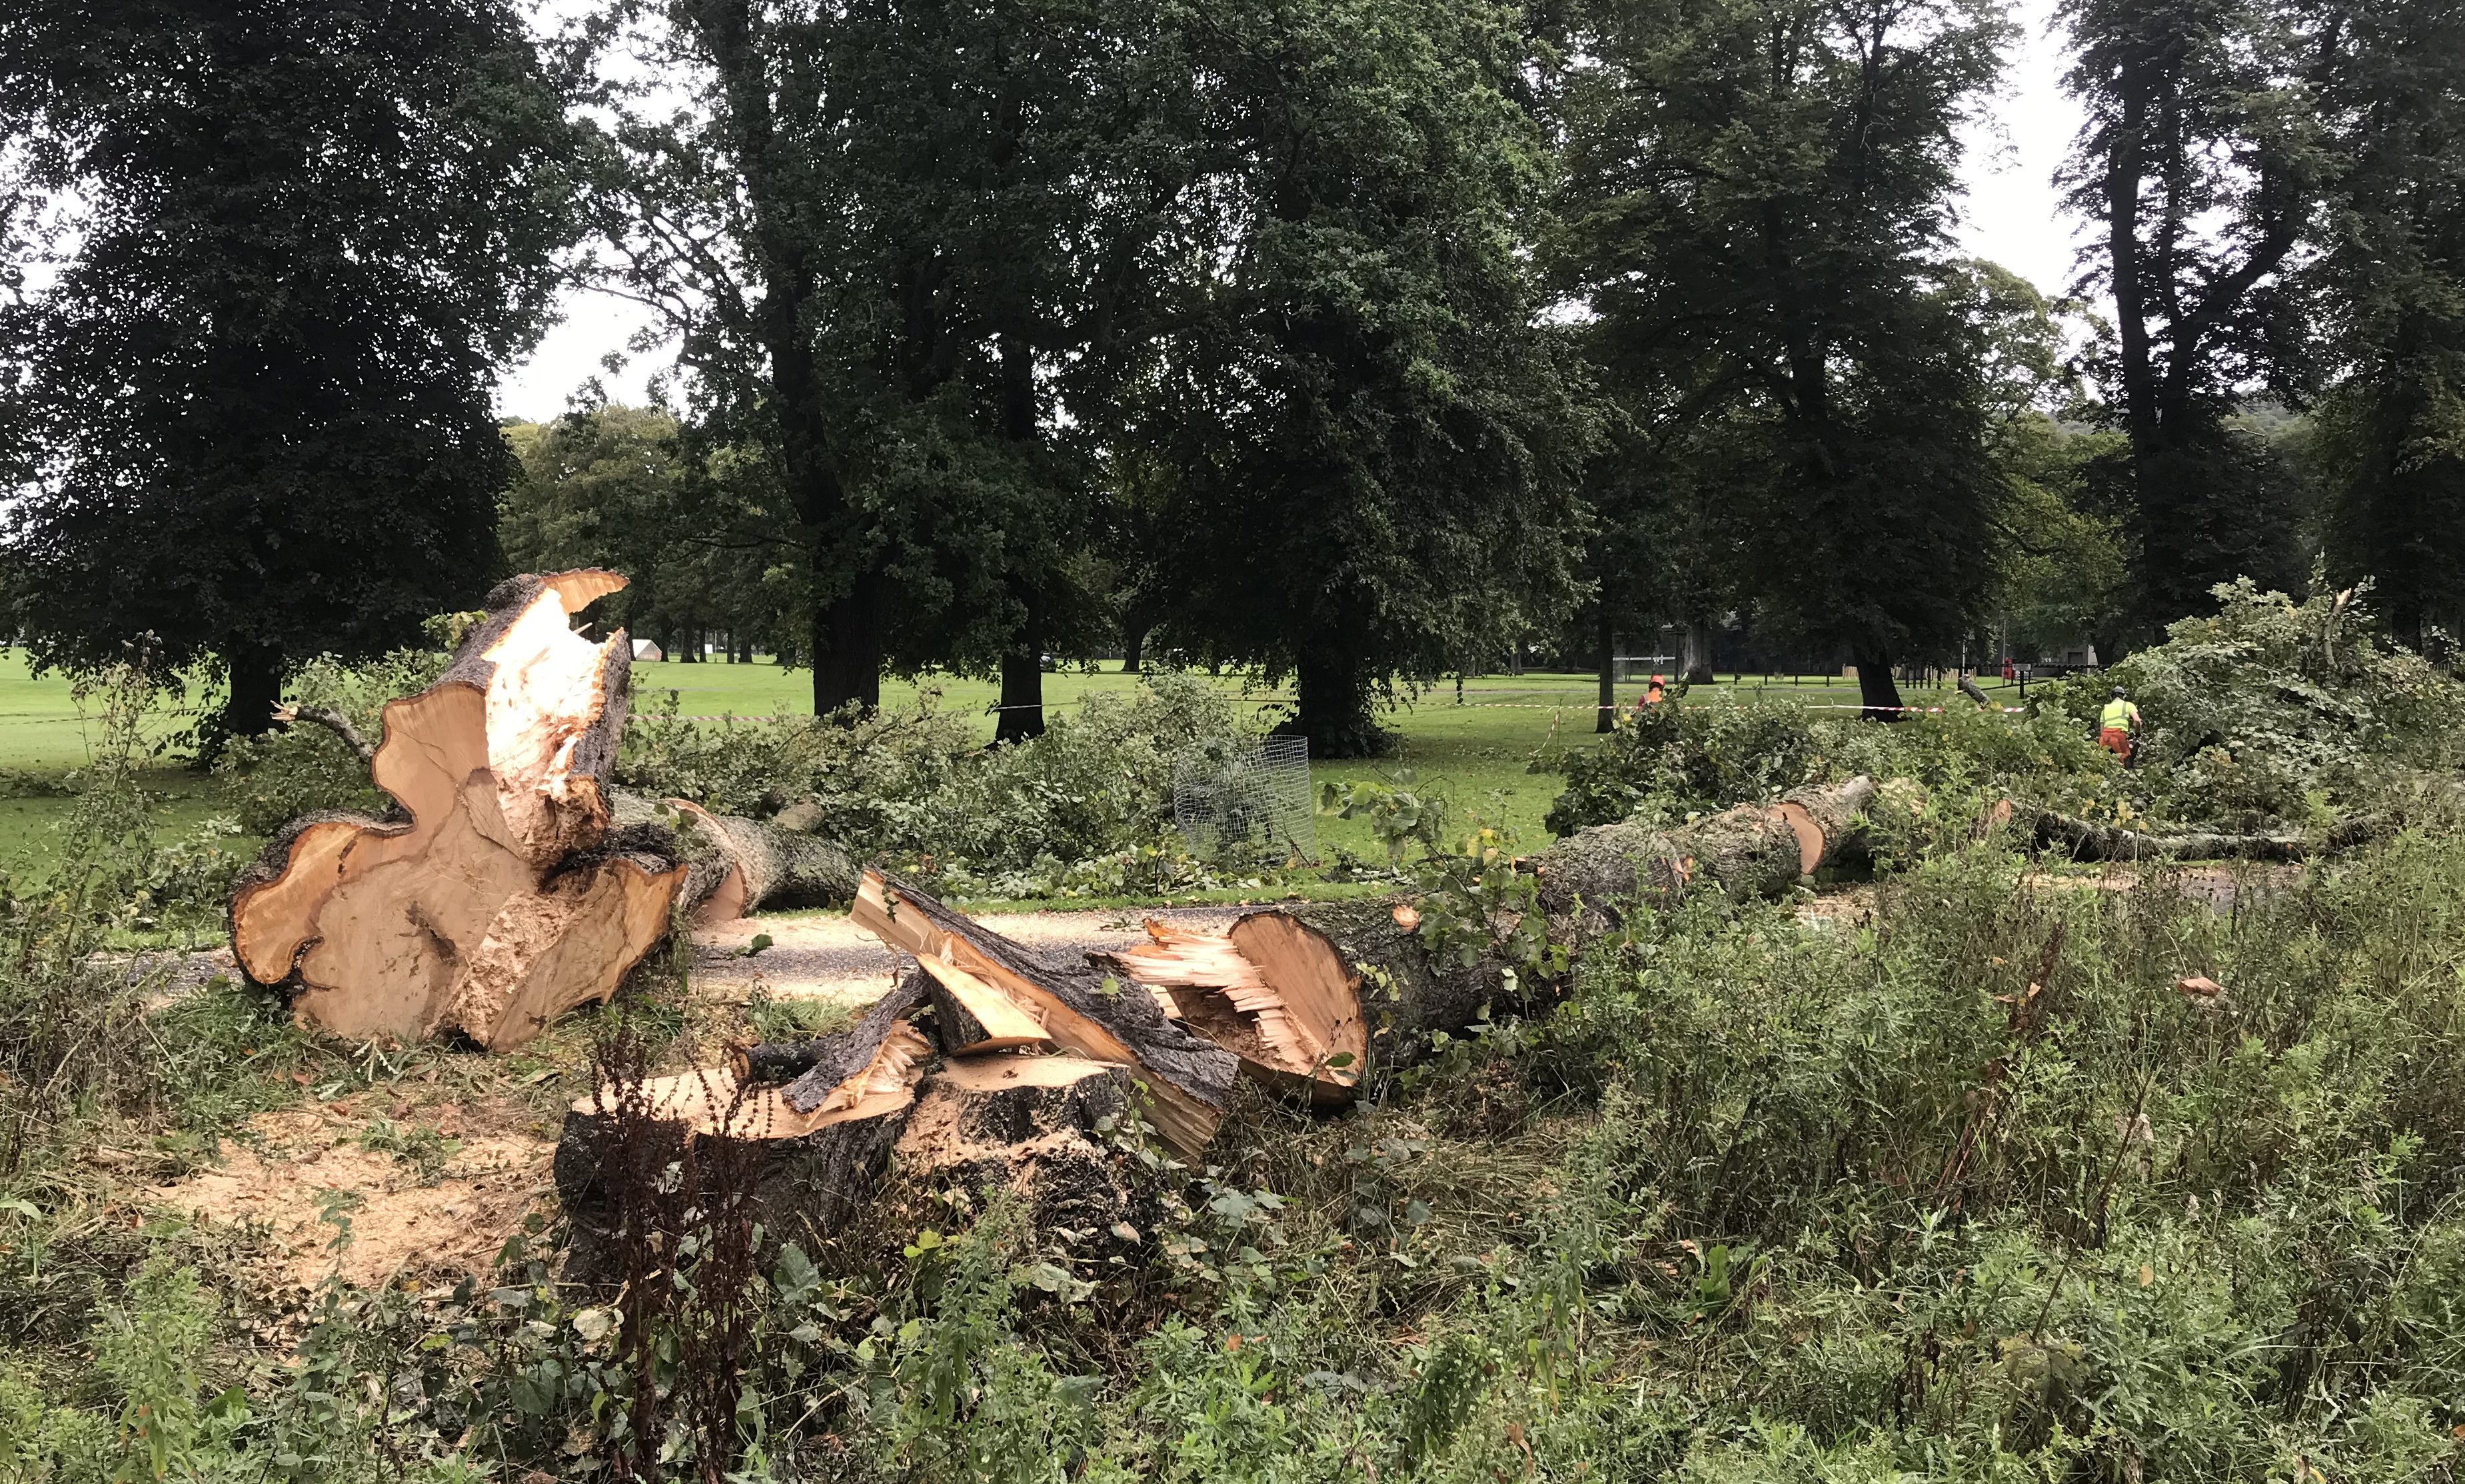 Giant lime trees have been felled at South Inch, Perth